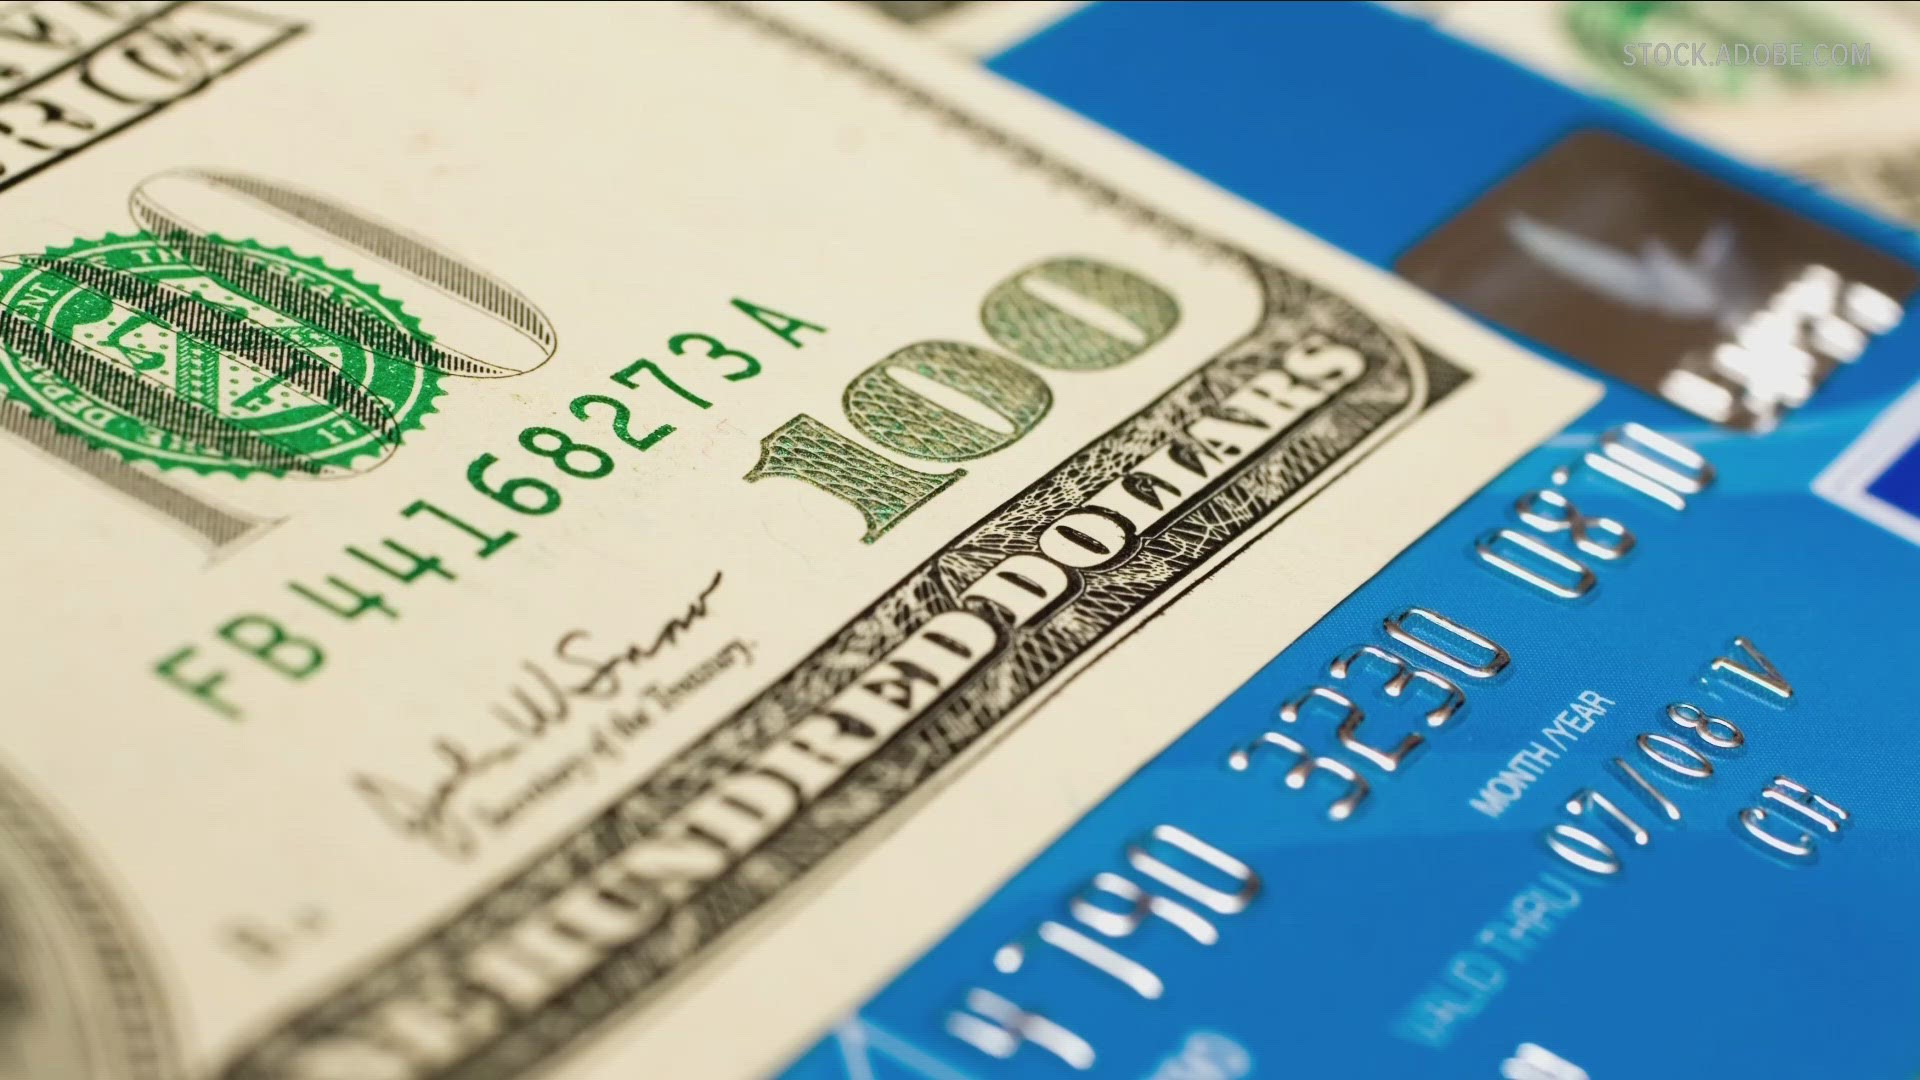 Rewards credit card's put under new consumer protection law.